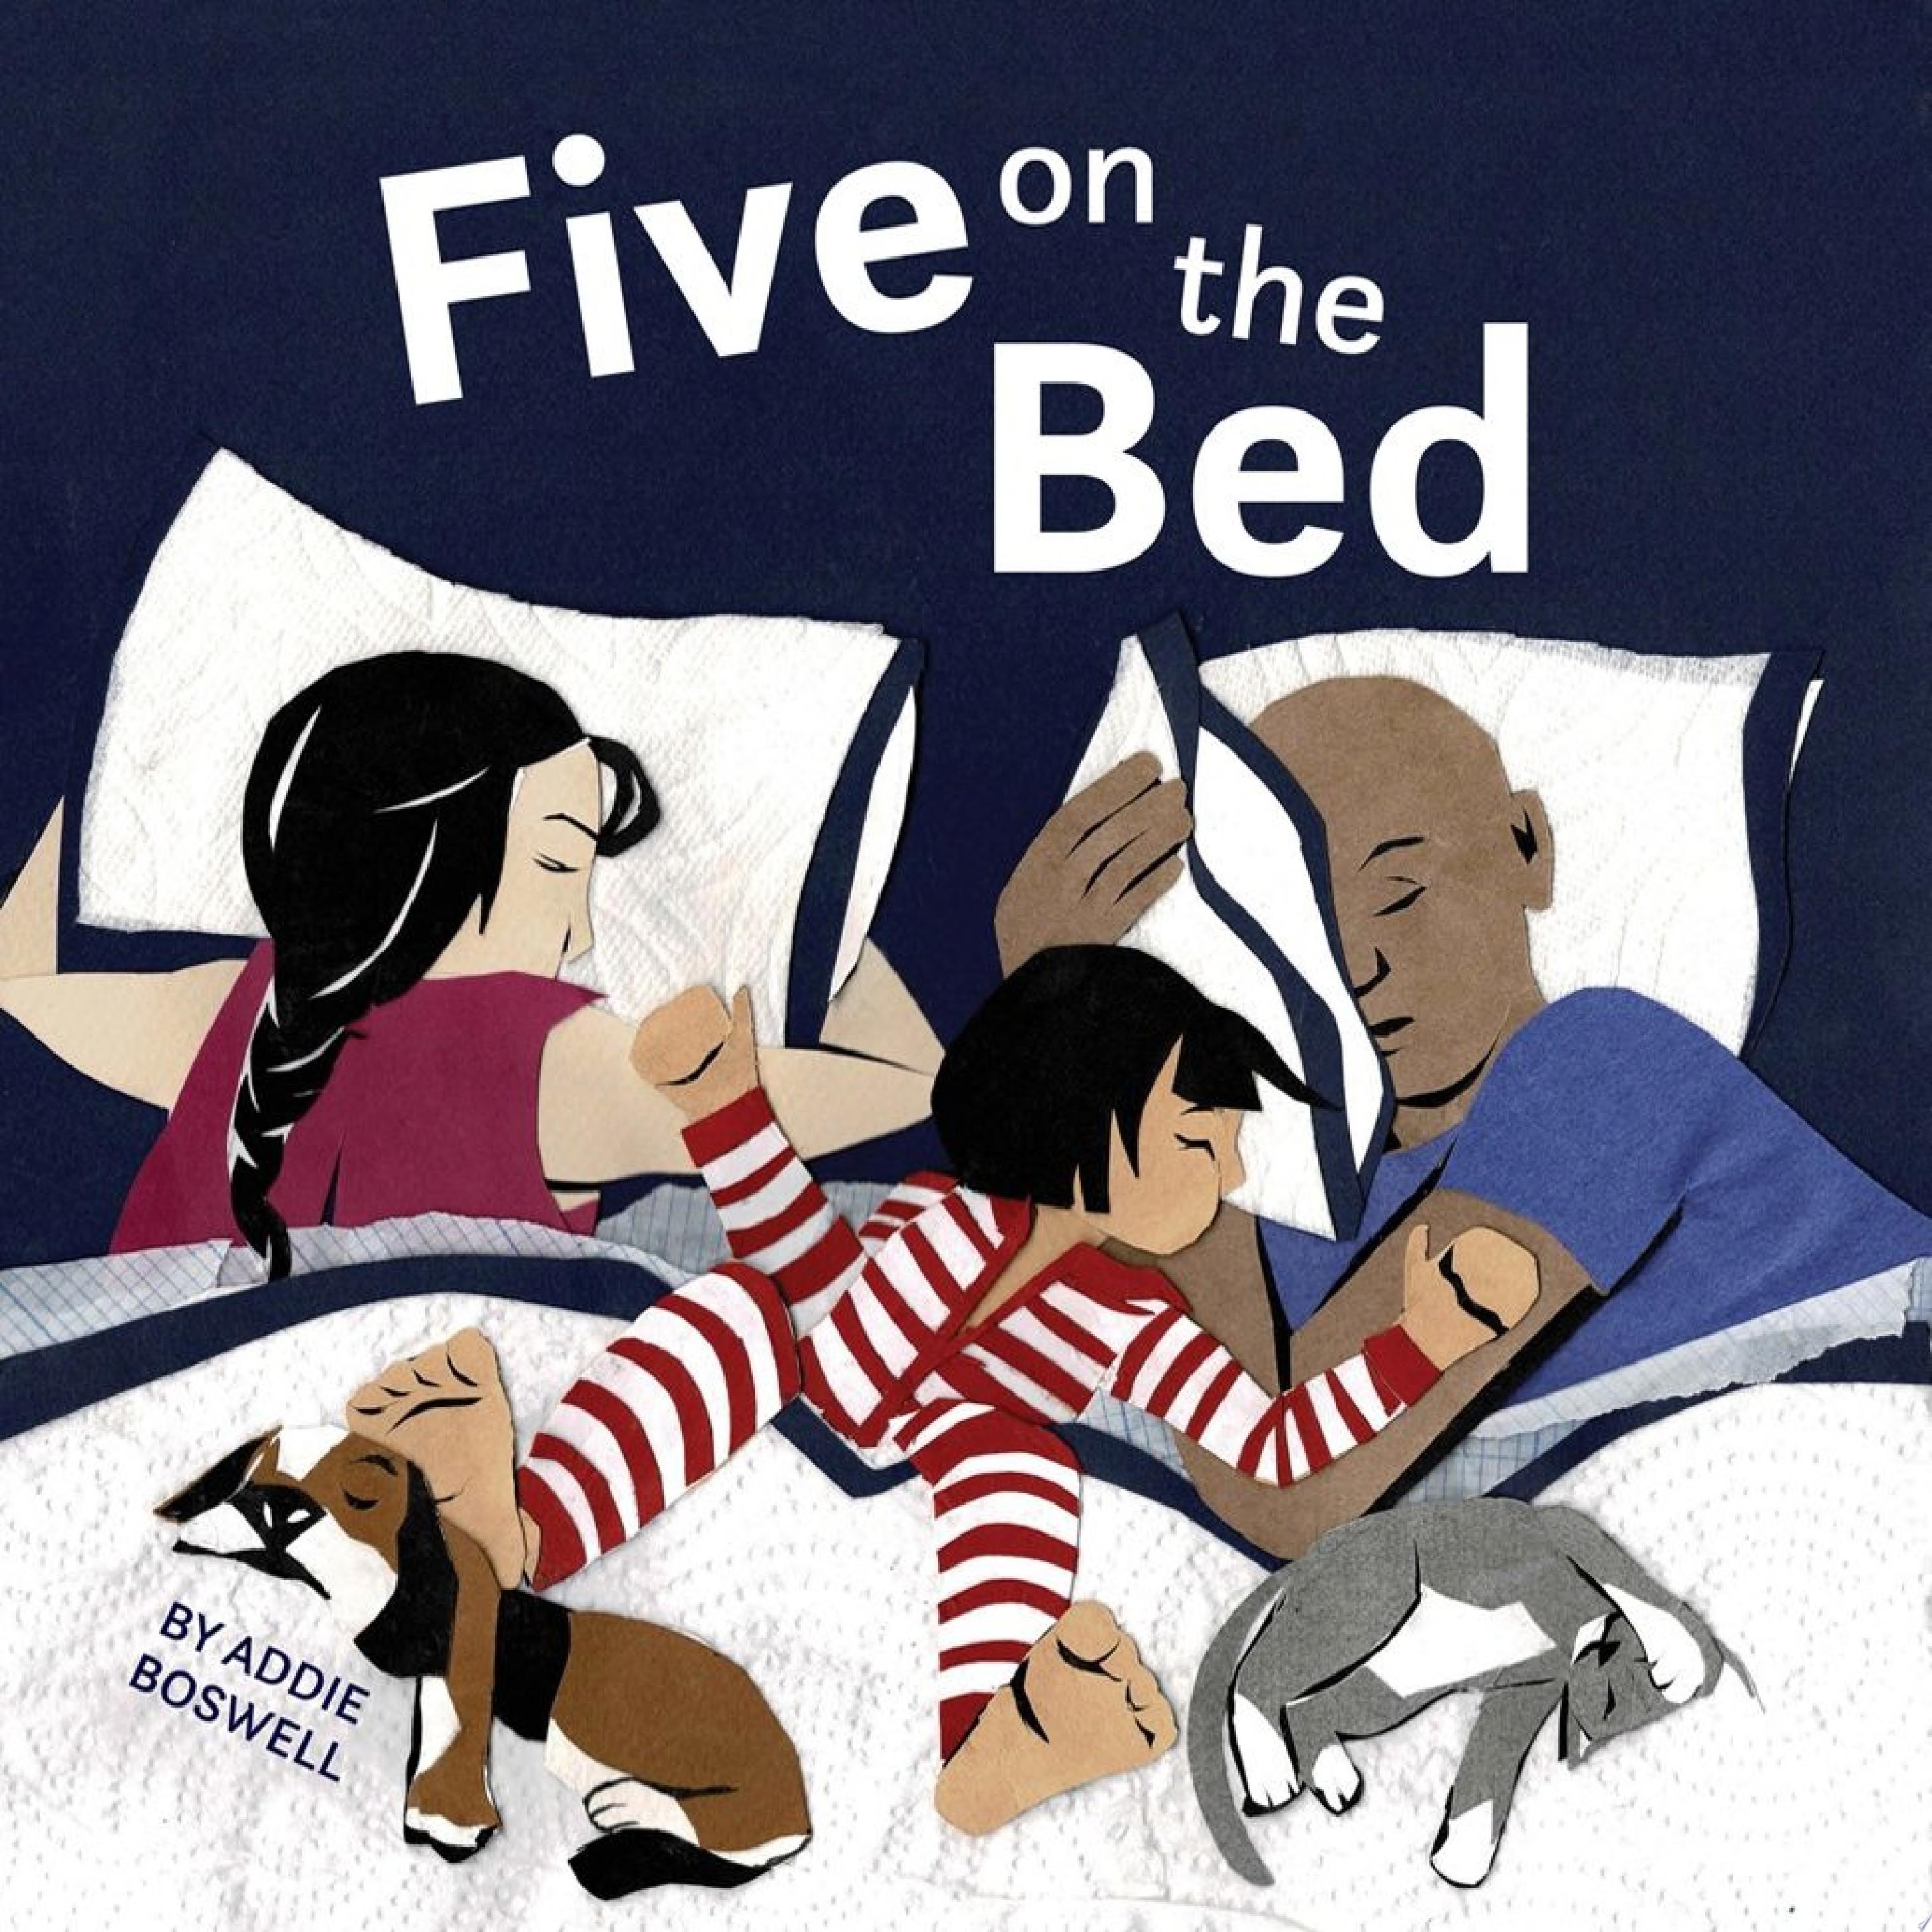 Image for "Five on the Bed"